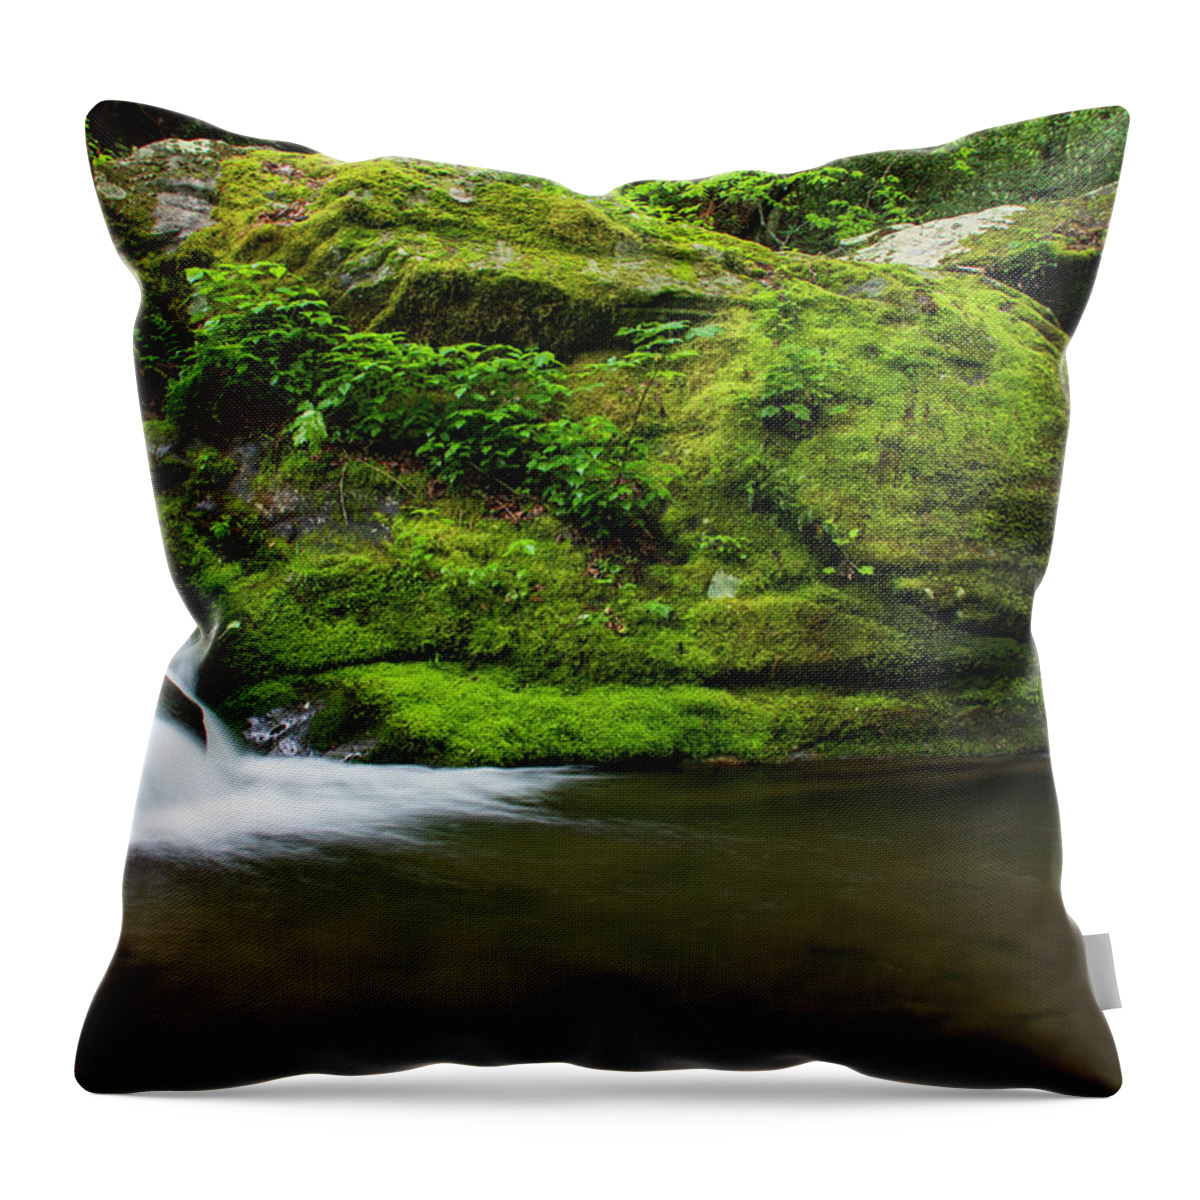 Great Smoky Mountains National Park Throw Pillow featuring the photograph Below 1000 Drips 2 by Melissa Southern